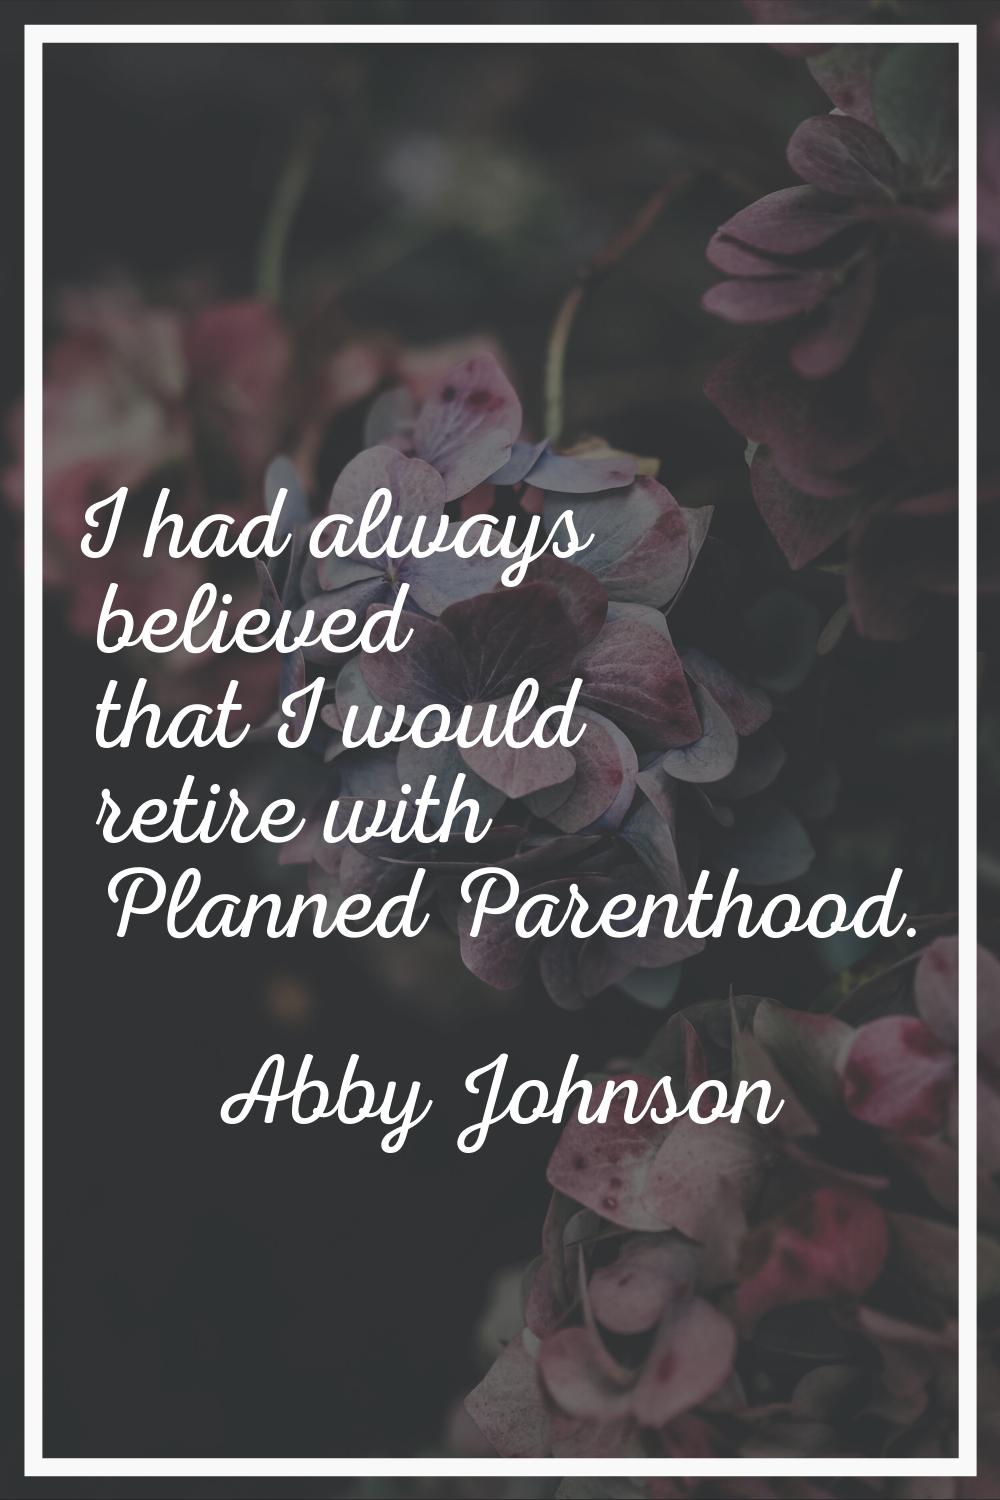 I had always believed that I would retire with Planned Parenthood.